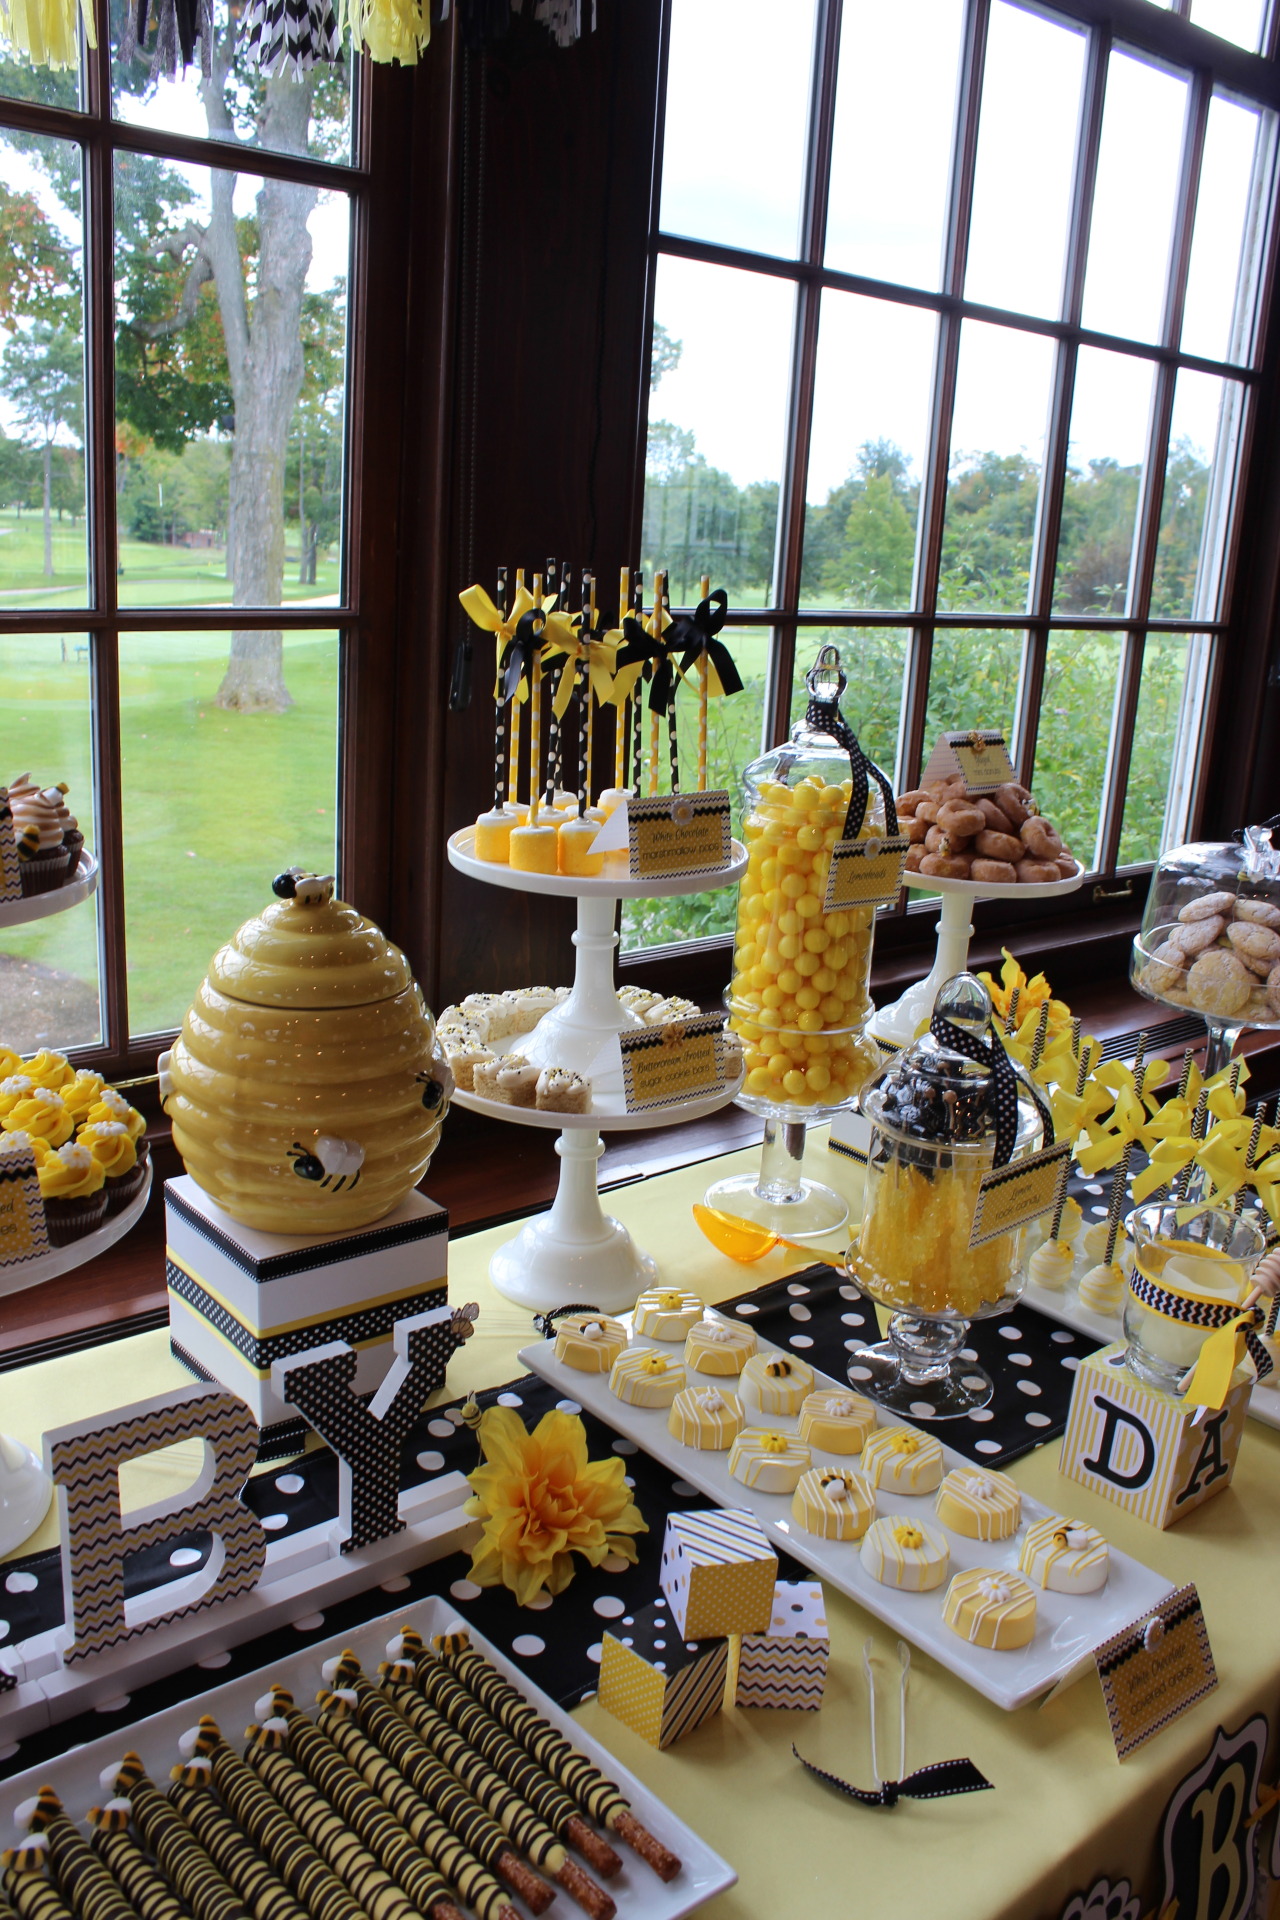 Sweet Simplicity Bakery — Bumblebee Themed Baby Shower (“Mommy To Bee”)...